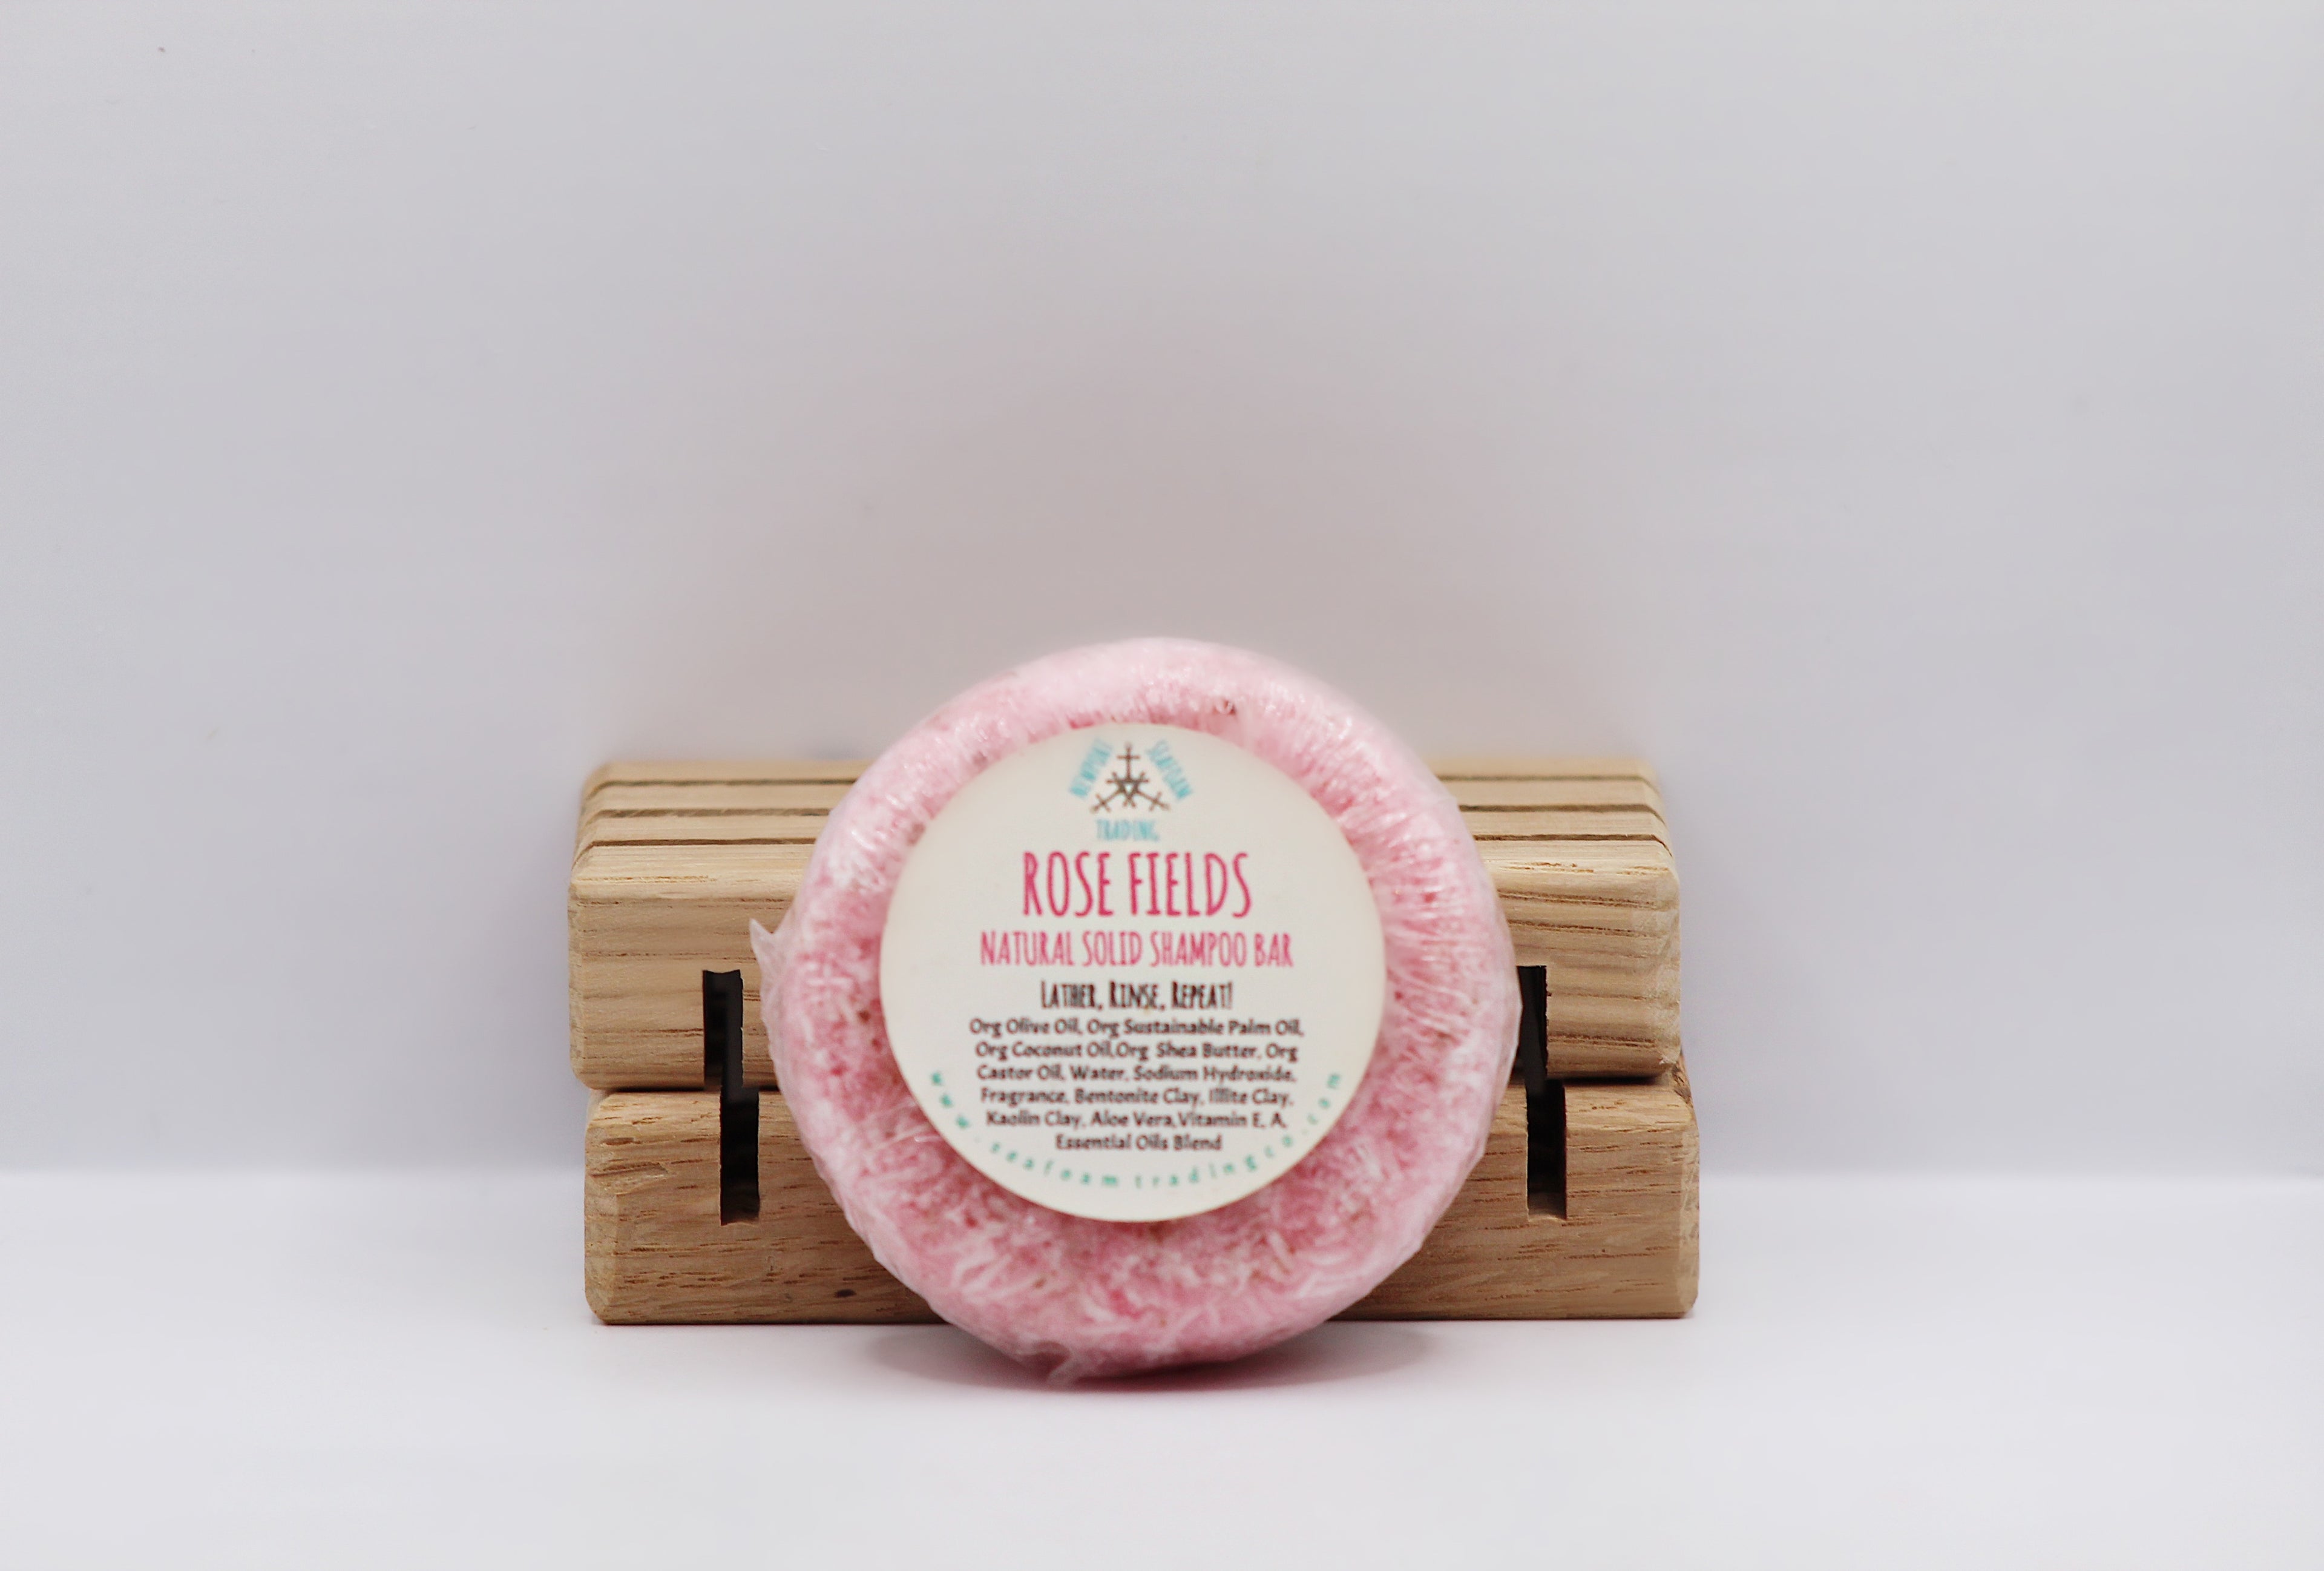 Rose Fields Natural Solid Shampoo Bar